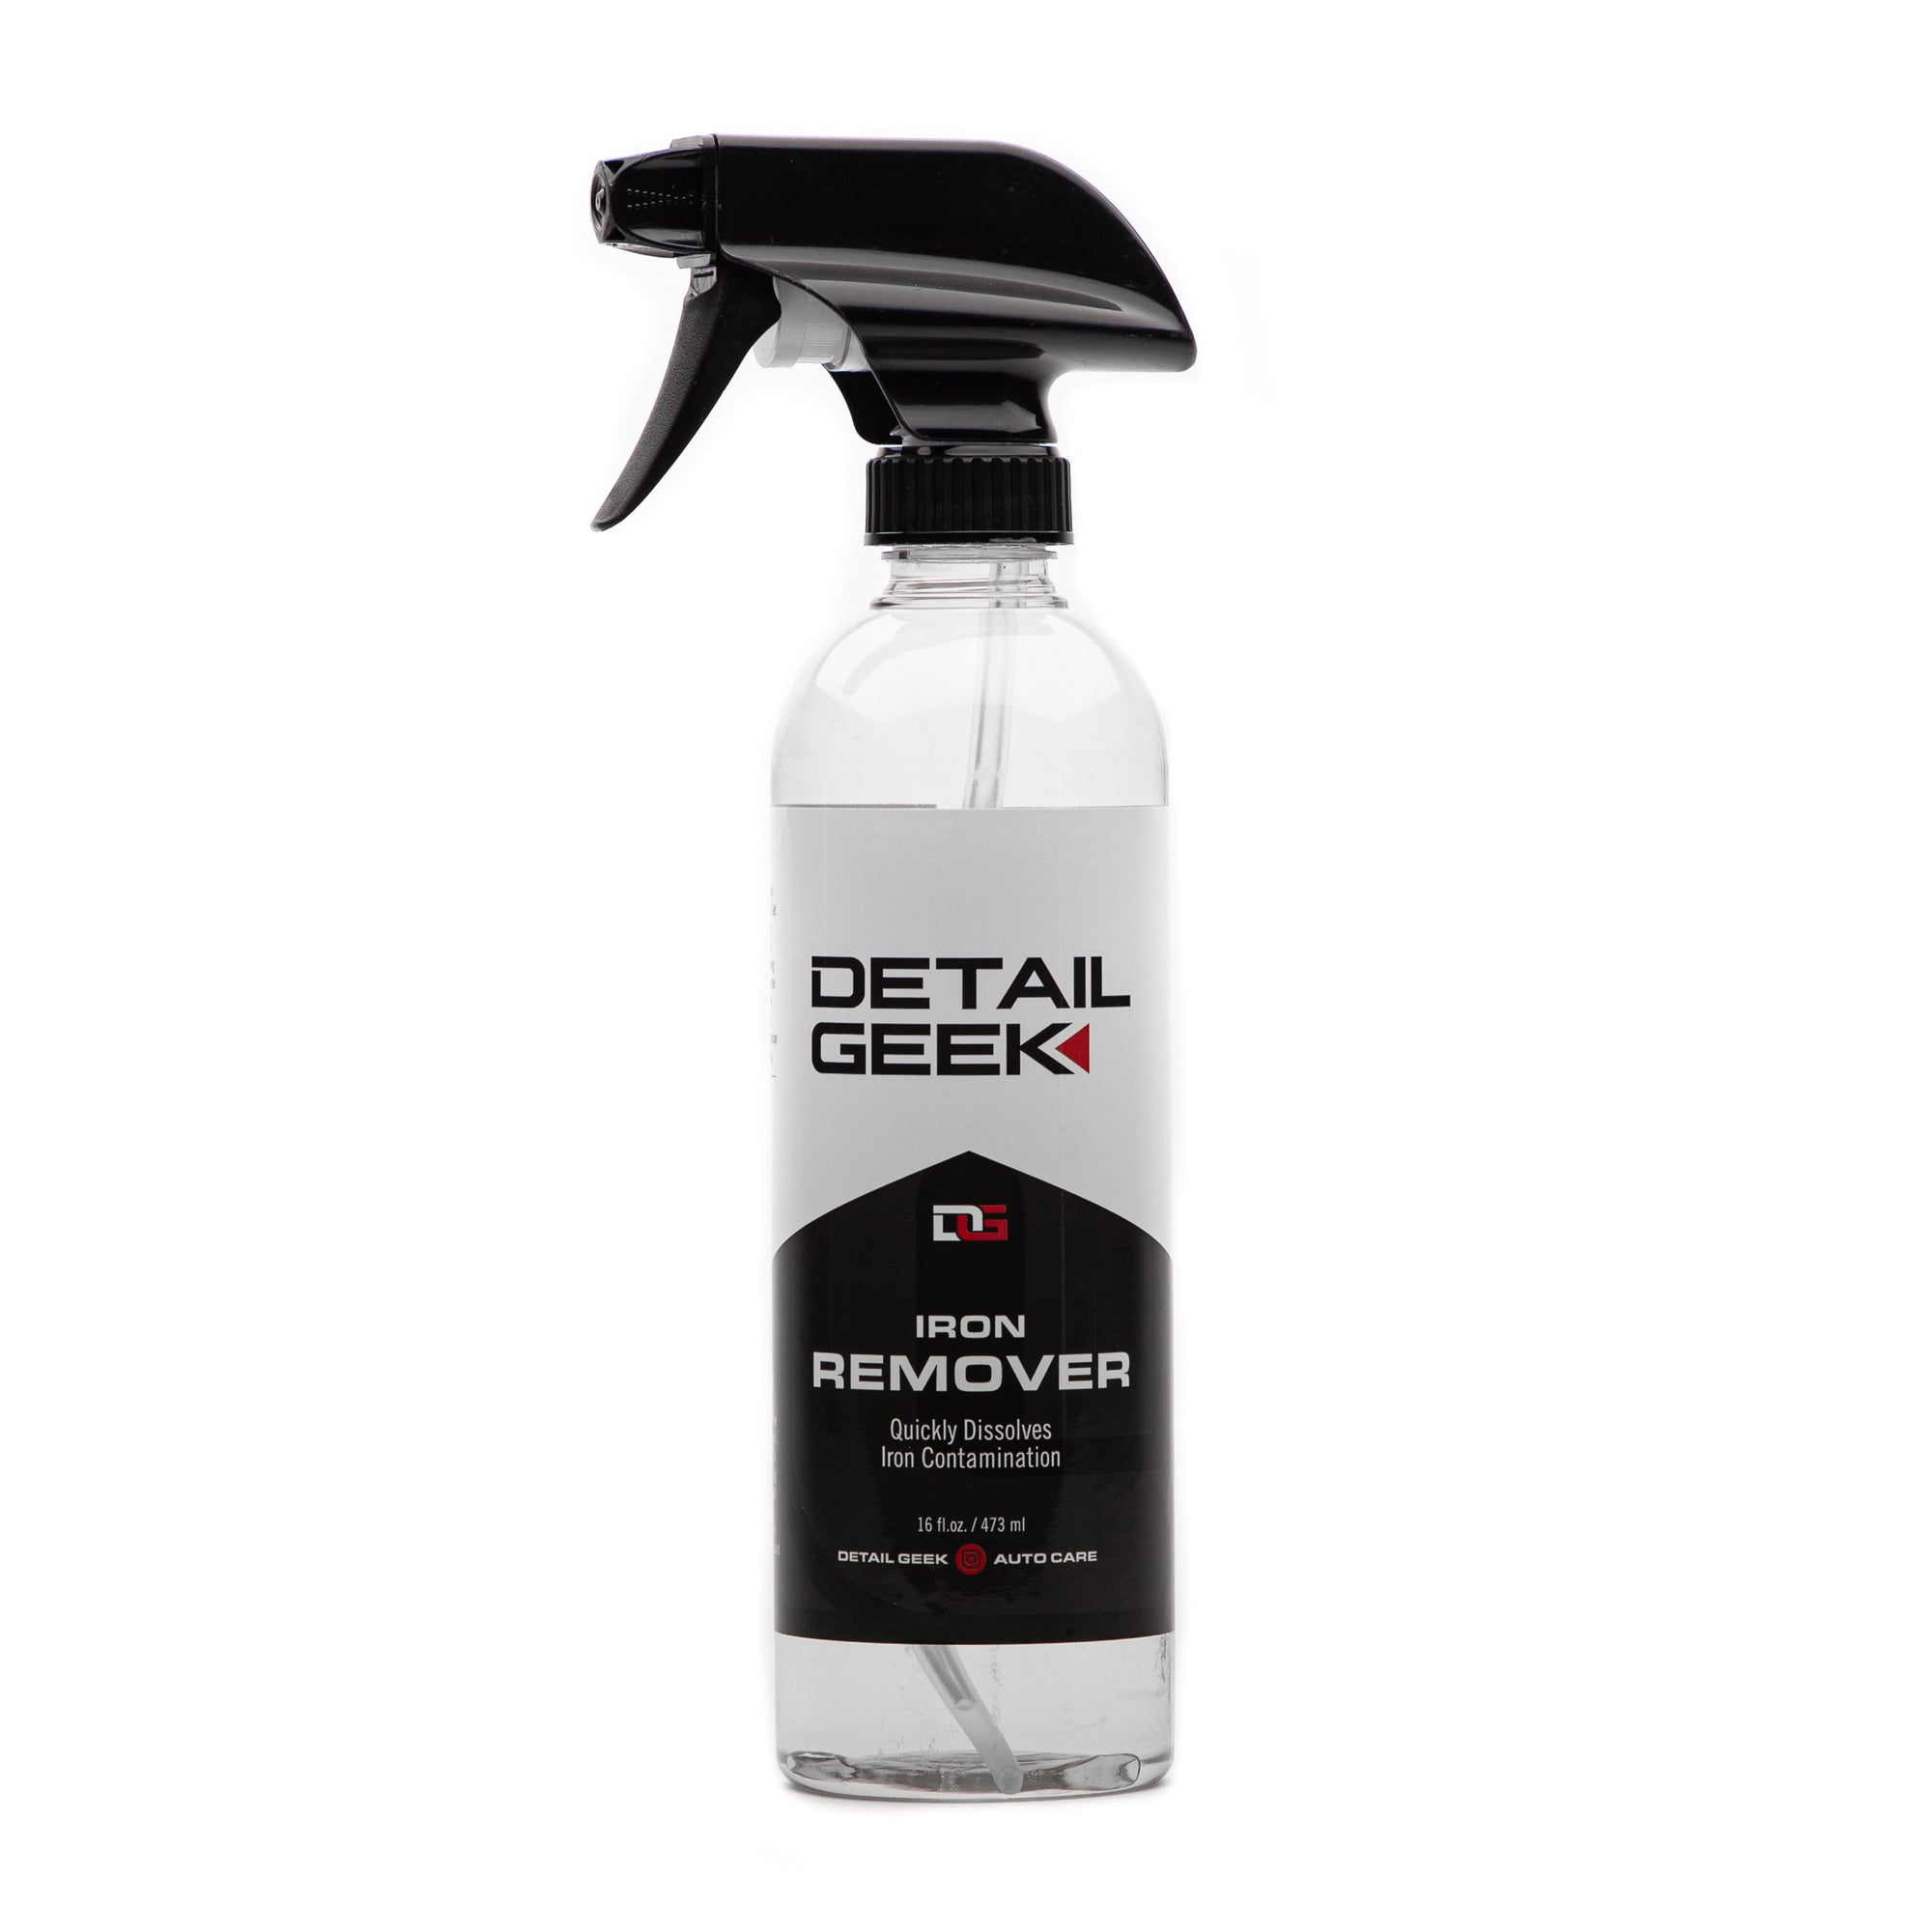 Detail Geek Iron Remover for removing iron contamination from vehicle paint purple iron remover dissolves iron particles